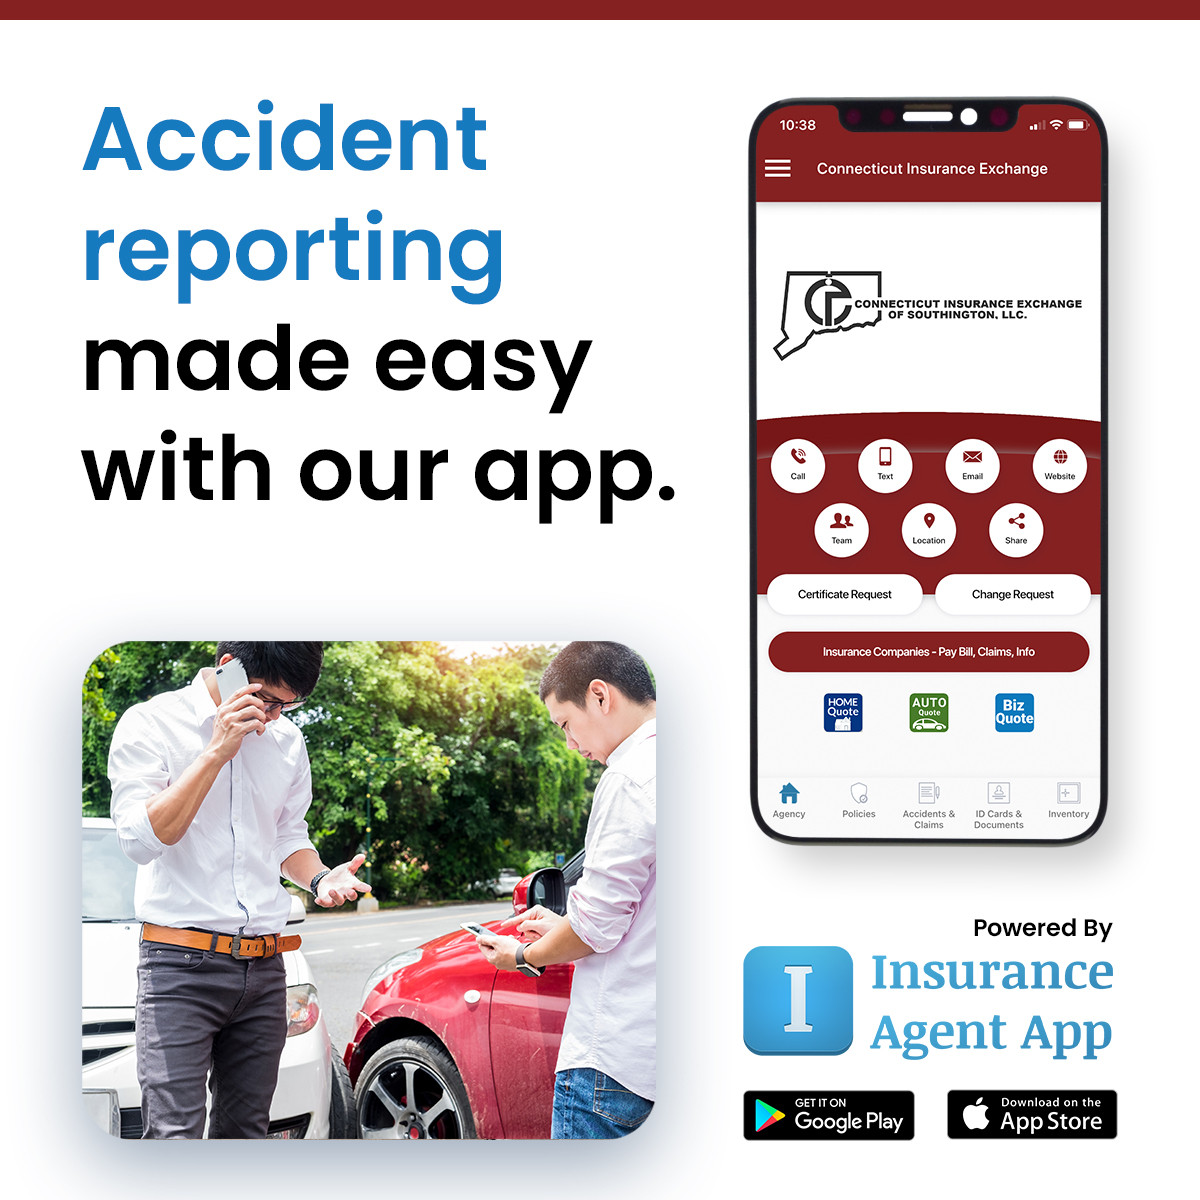 Our app works 24/7 just like your insurance. Click the link below to download our app! 
🔗bit.ly/3ZPbSXm  
#ctinsuranceexchangeofsouthington #ctinsuranceprofessionals #ctinsurance